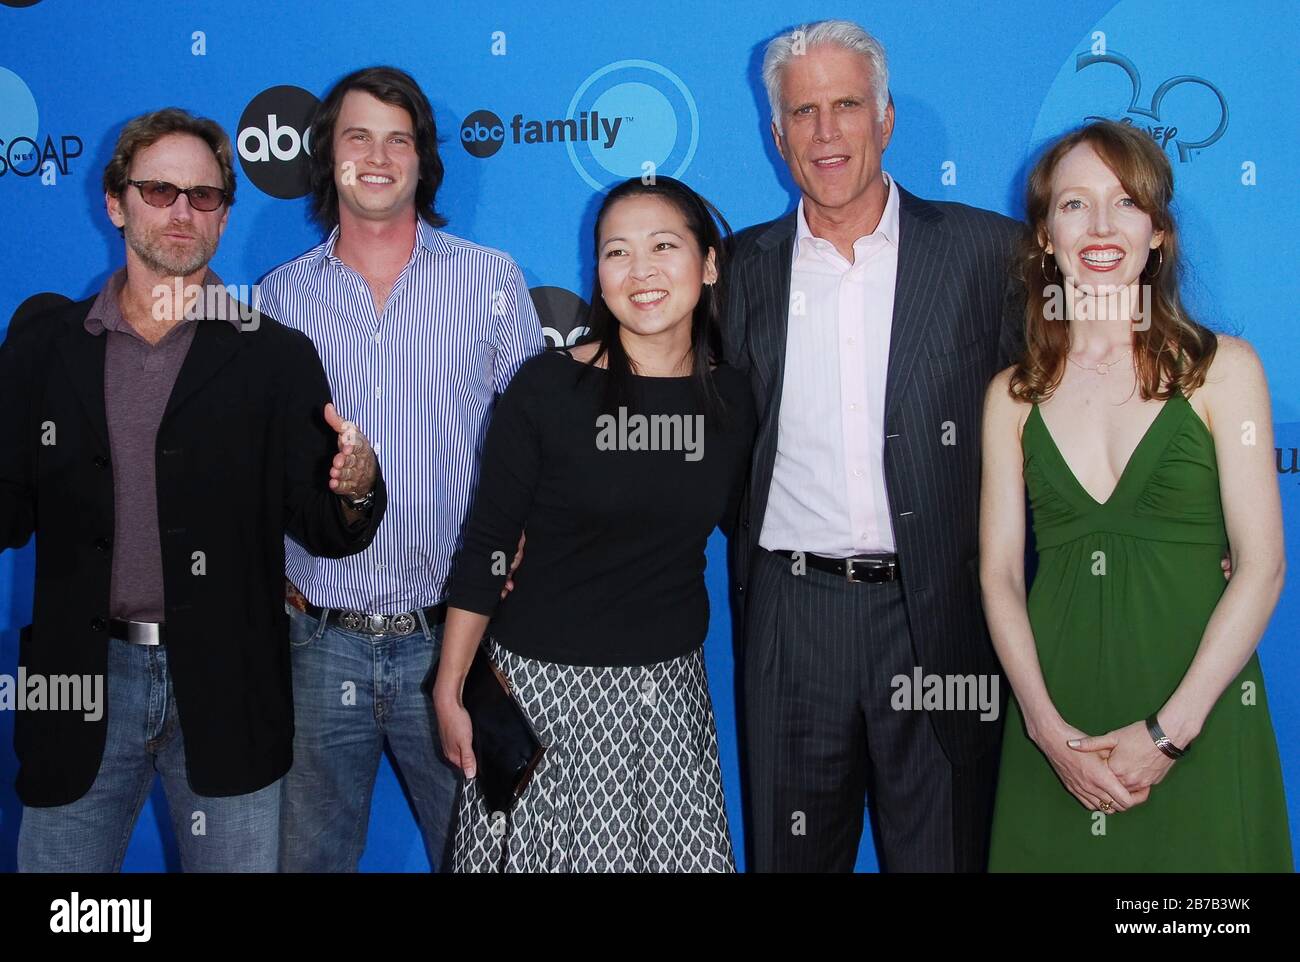 'Help Me, Help You' Cast - Jere Burns, Charlie Finn, Suzy Nakamura, Ted Danson and Darlene Hunt at the Disney ABC Television Group All Star Party held at the Kidspace Children's Museum in Pasadena, CA. The event took place on Wednesday, July 19, 2006.  Photo by: SBM / PictureLux Stock Photo